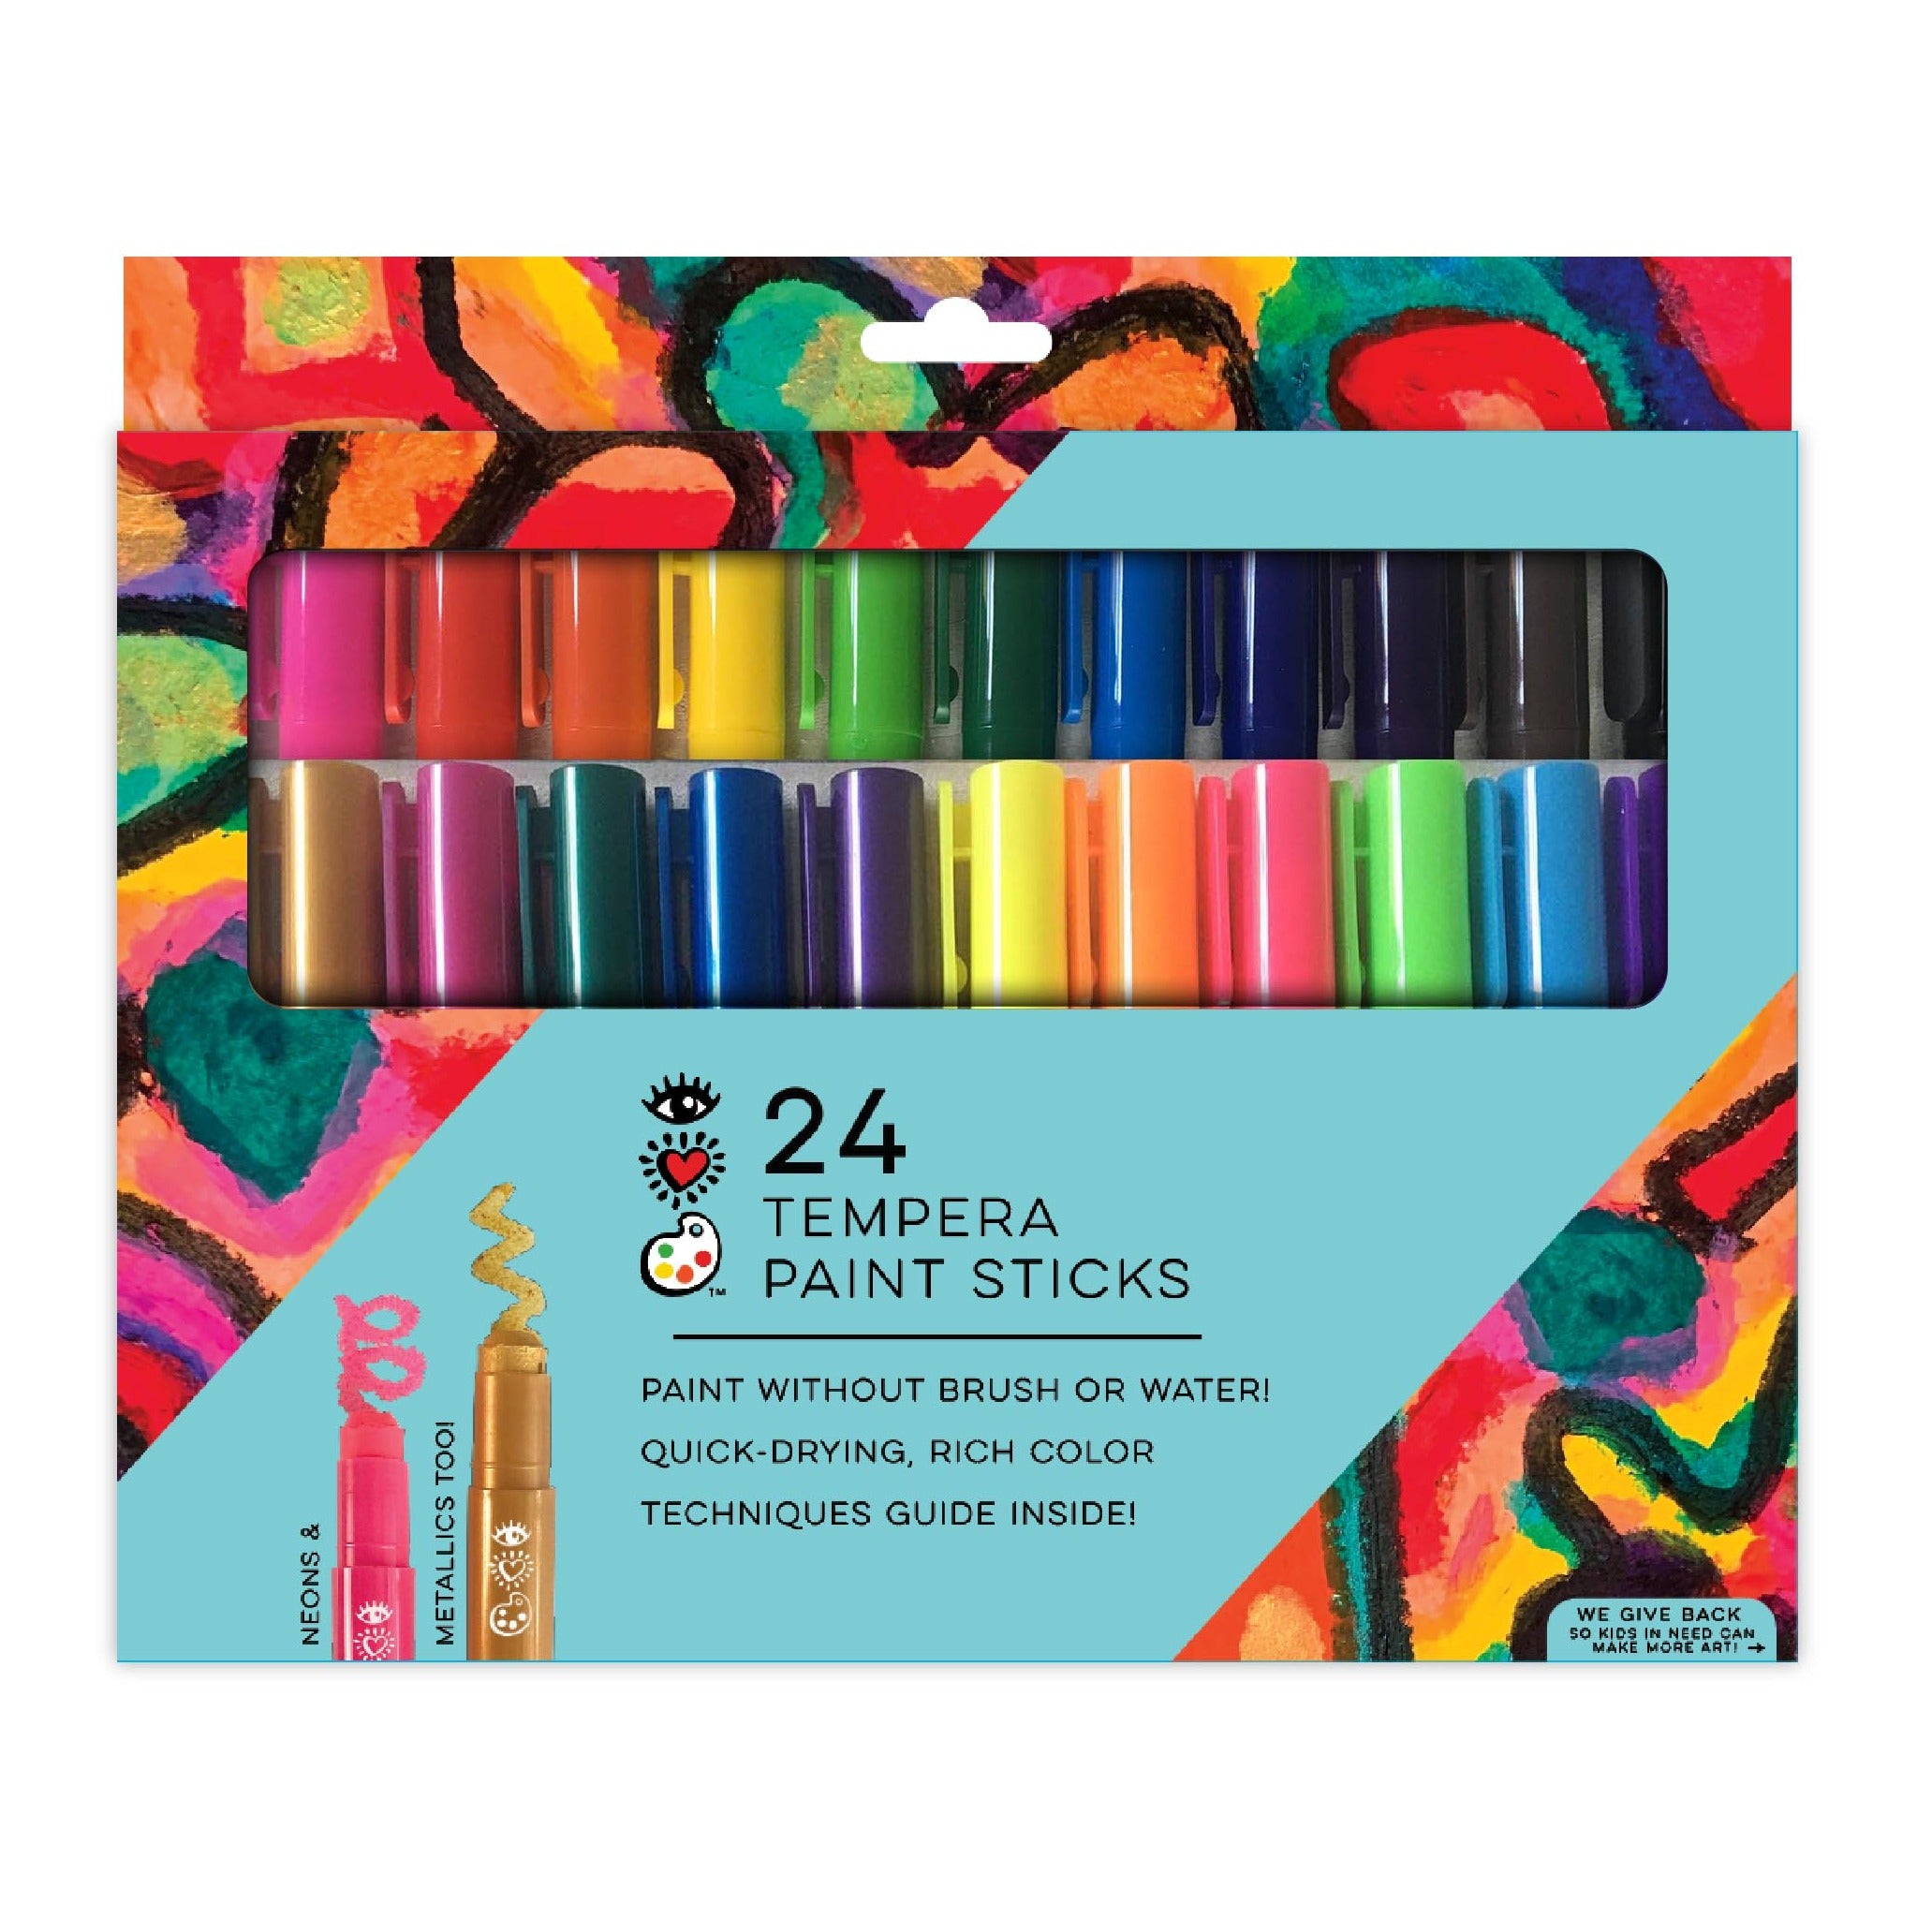 Washable Tempera Paint Sticks for Kids, 24 Colors (5 in, 24 Pack